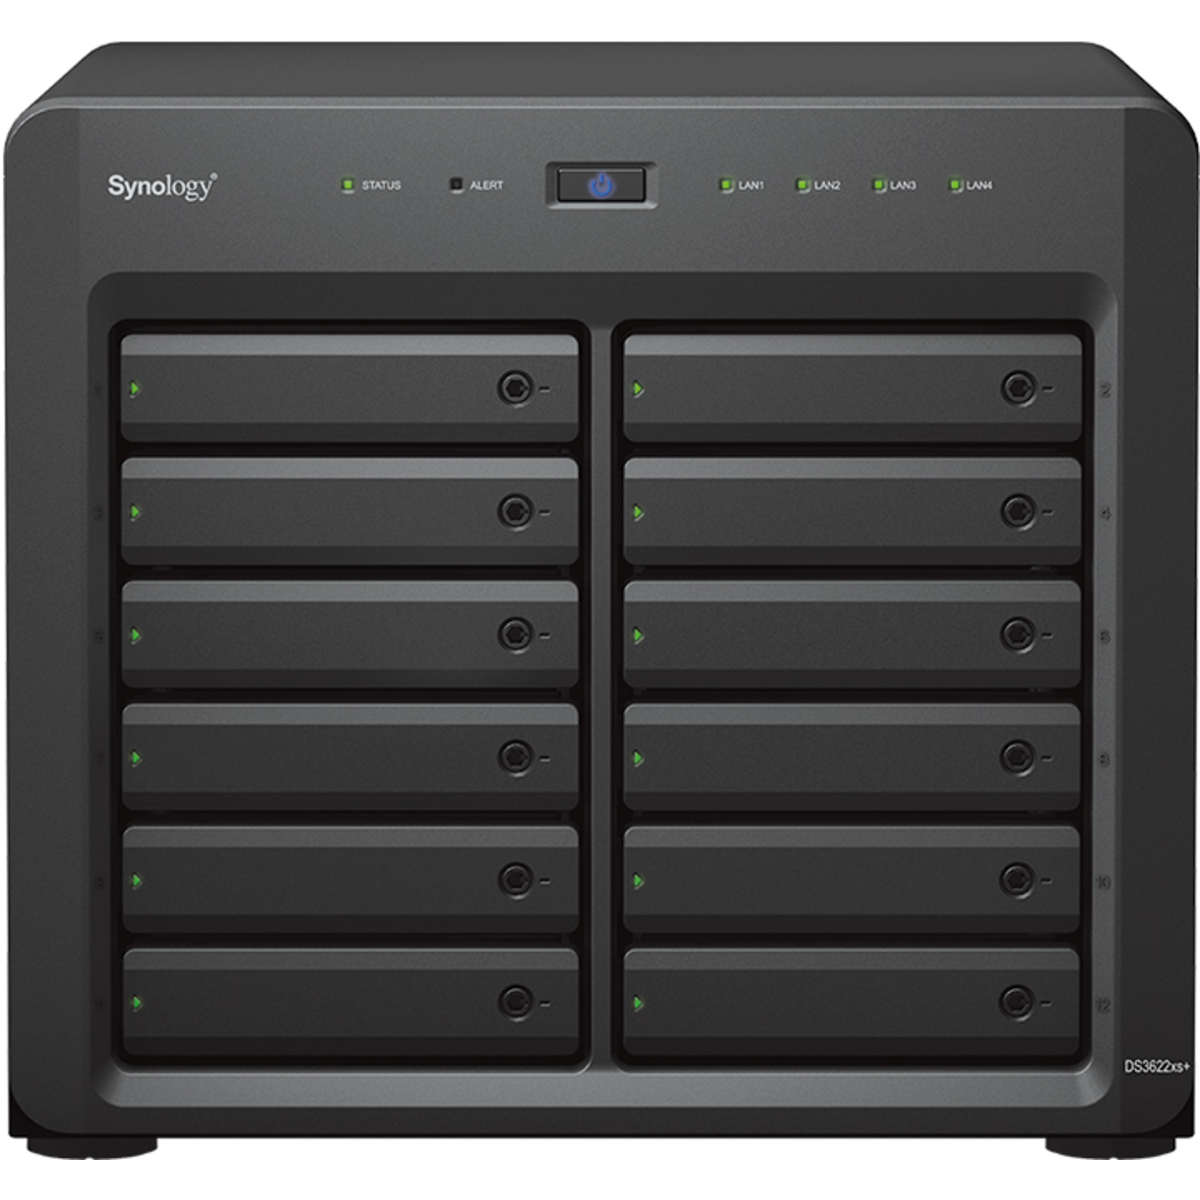 Synology DiskStation DS3622xs+ 264tb 12-Bay Desktop Multimedia / Power User / Business NAS - Network Attached Storage Device 12x22tb Western Digital Ultrastar HC580 WUH722422ALE6L4 3.5 7200rpm SATA 6Gb/s HDD ENTERPRISE Class Drives Installed - Burn-In Tested DiskStation DS3622xs+